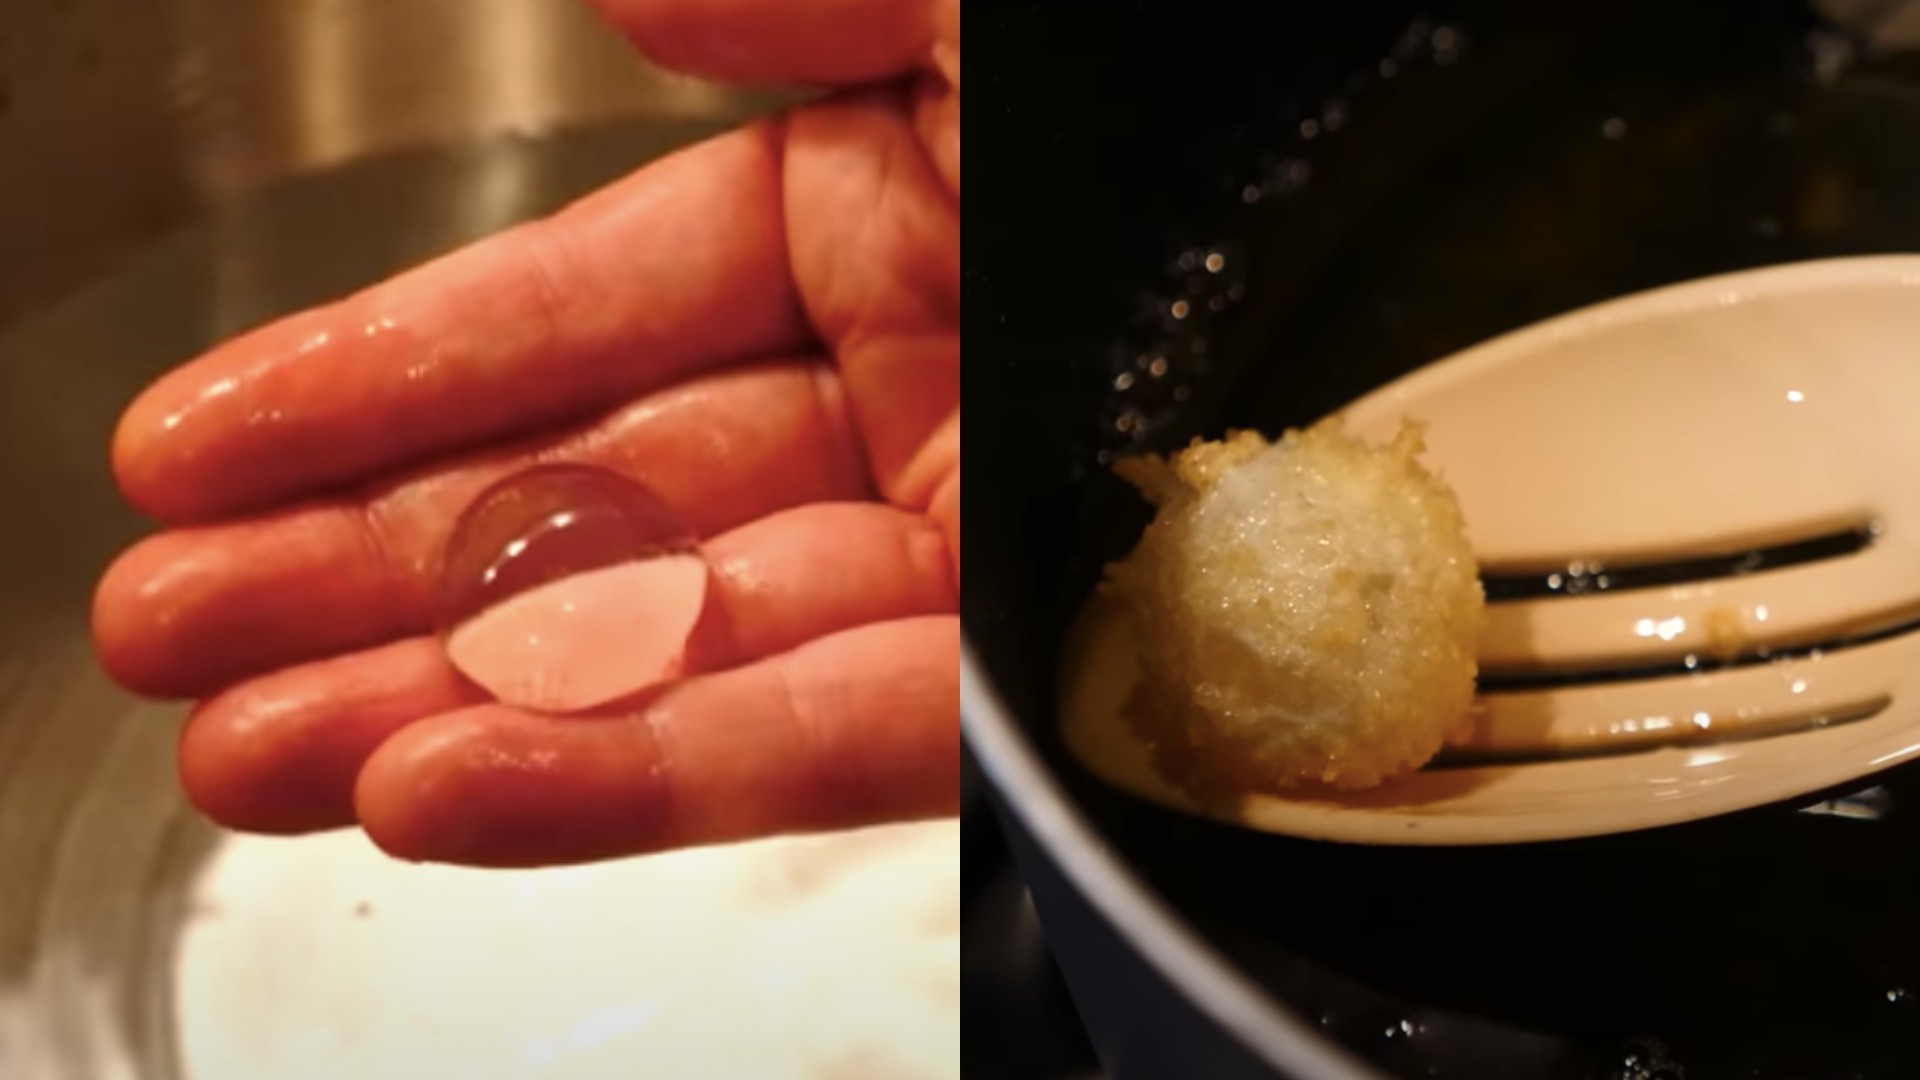 https://video-images.vice.com/articles/606431a26f2c22009306cf97/lede/1617179794681-we-asked-people-who-deep-fry-water-why.jpeg?crop=1xw:0.7111111111111111xh;center,center